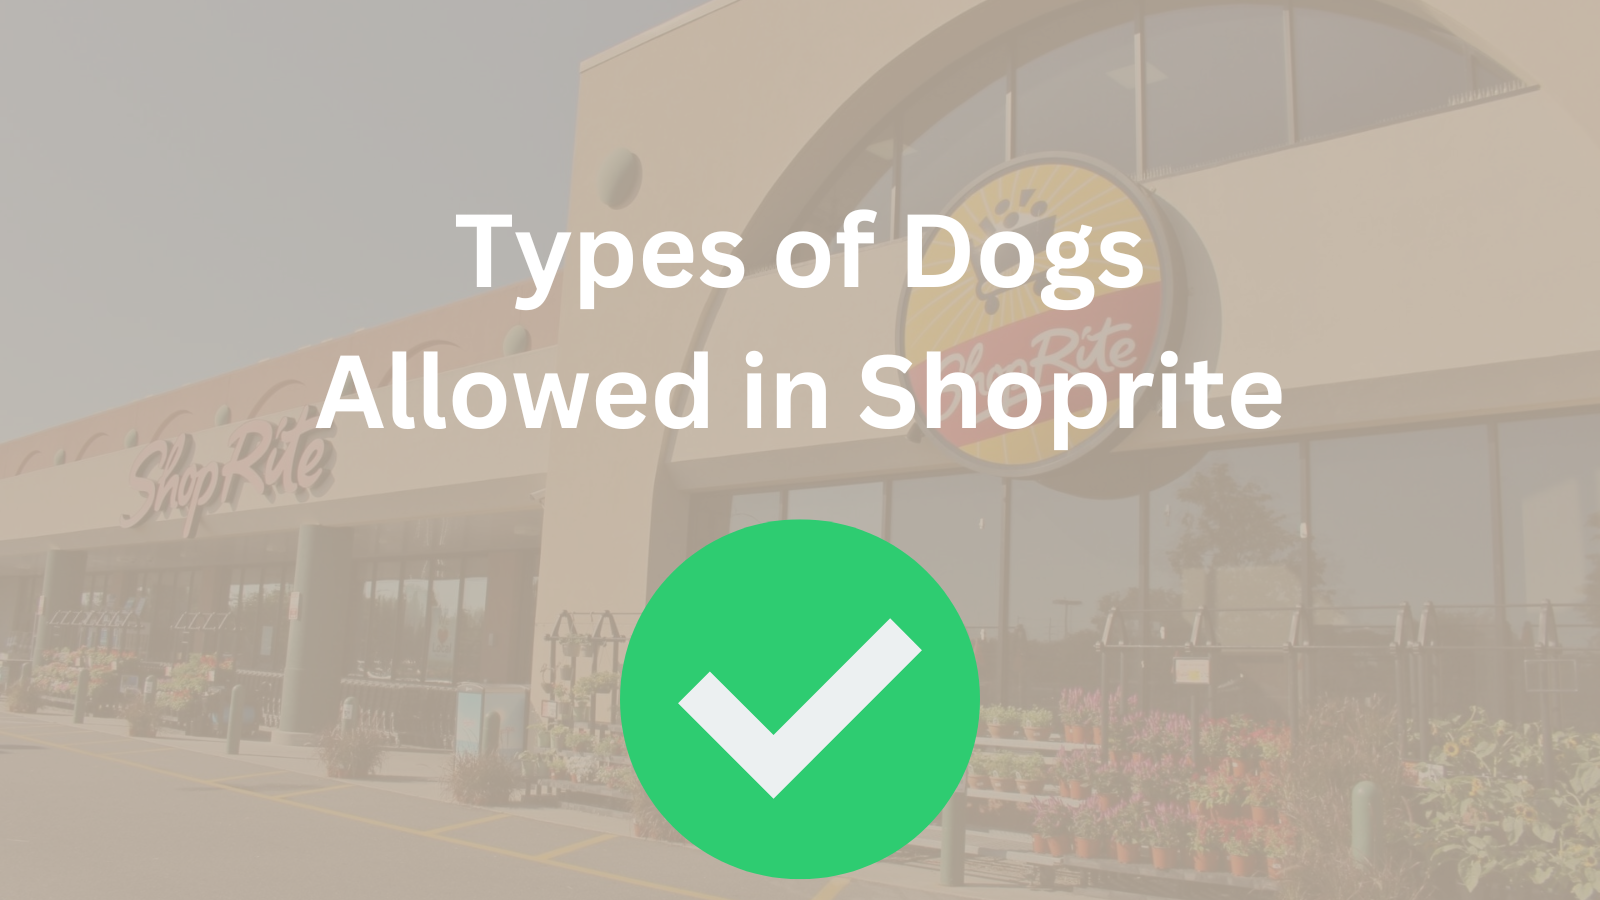 Image Text: "Types of Dogs Allowed in Shoprite"